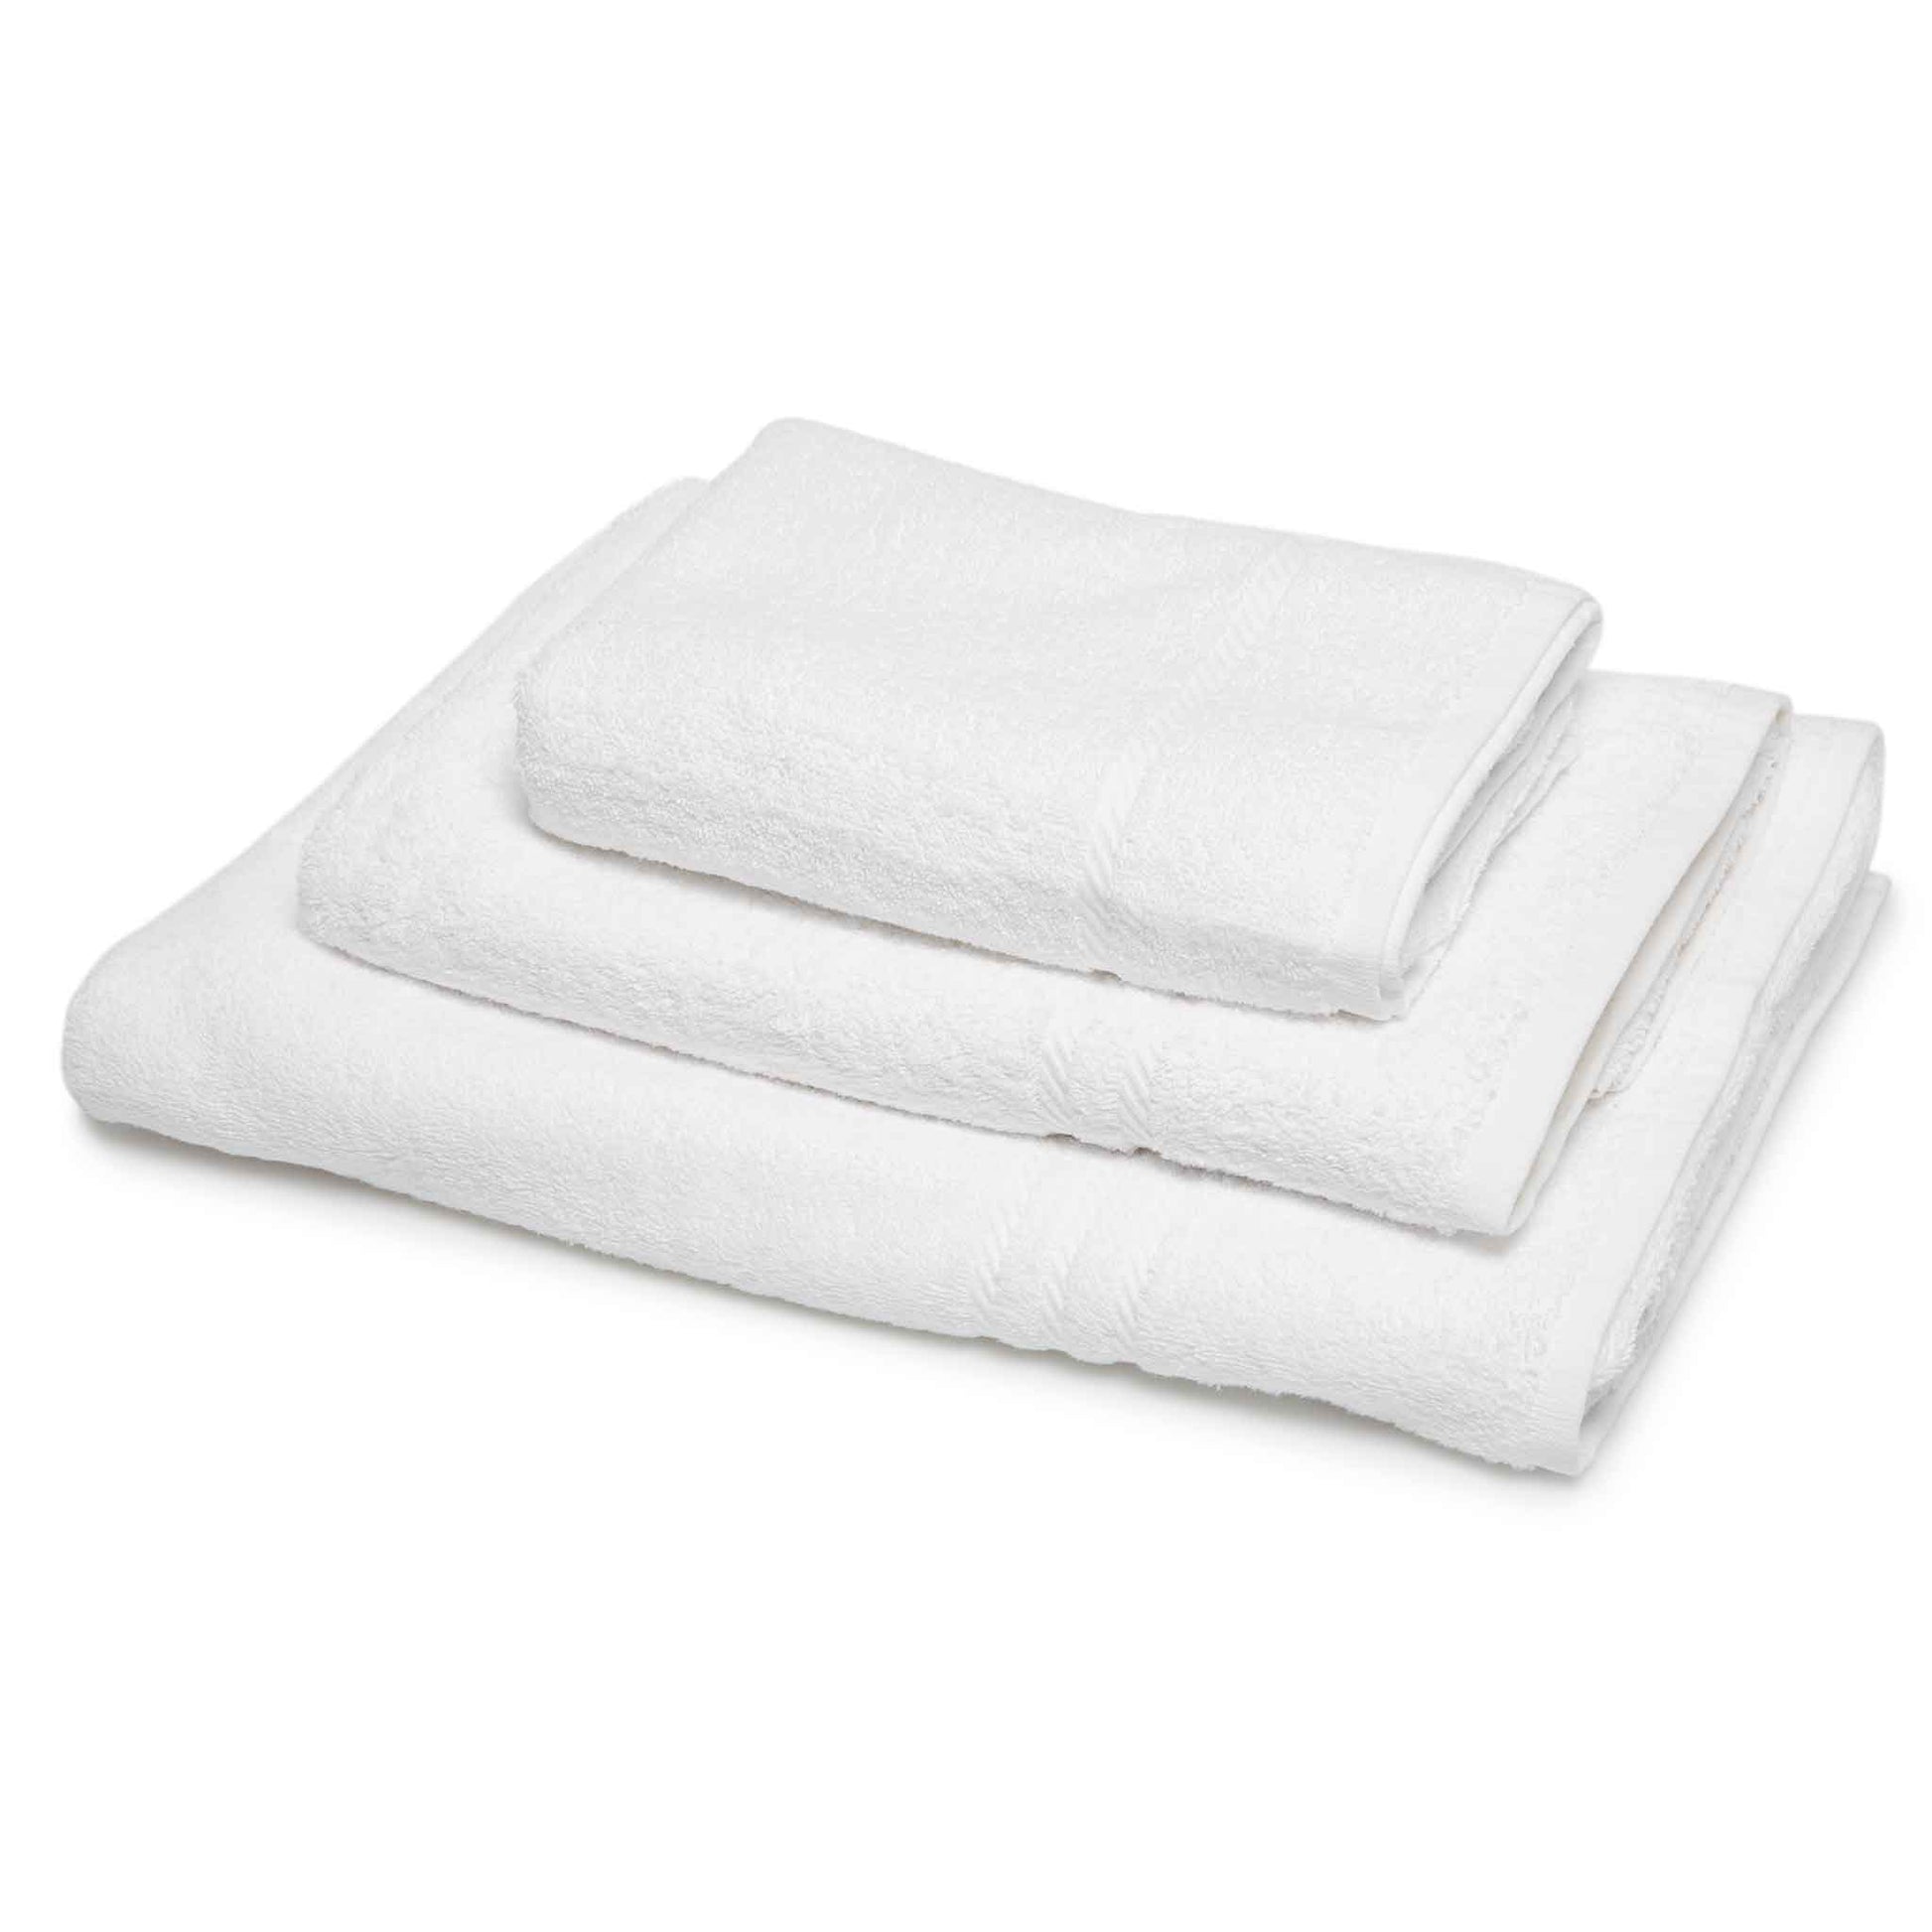 Stack of 500gsm white hotel bath and hand towels